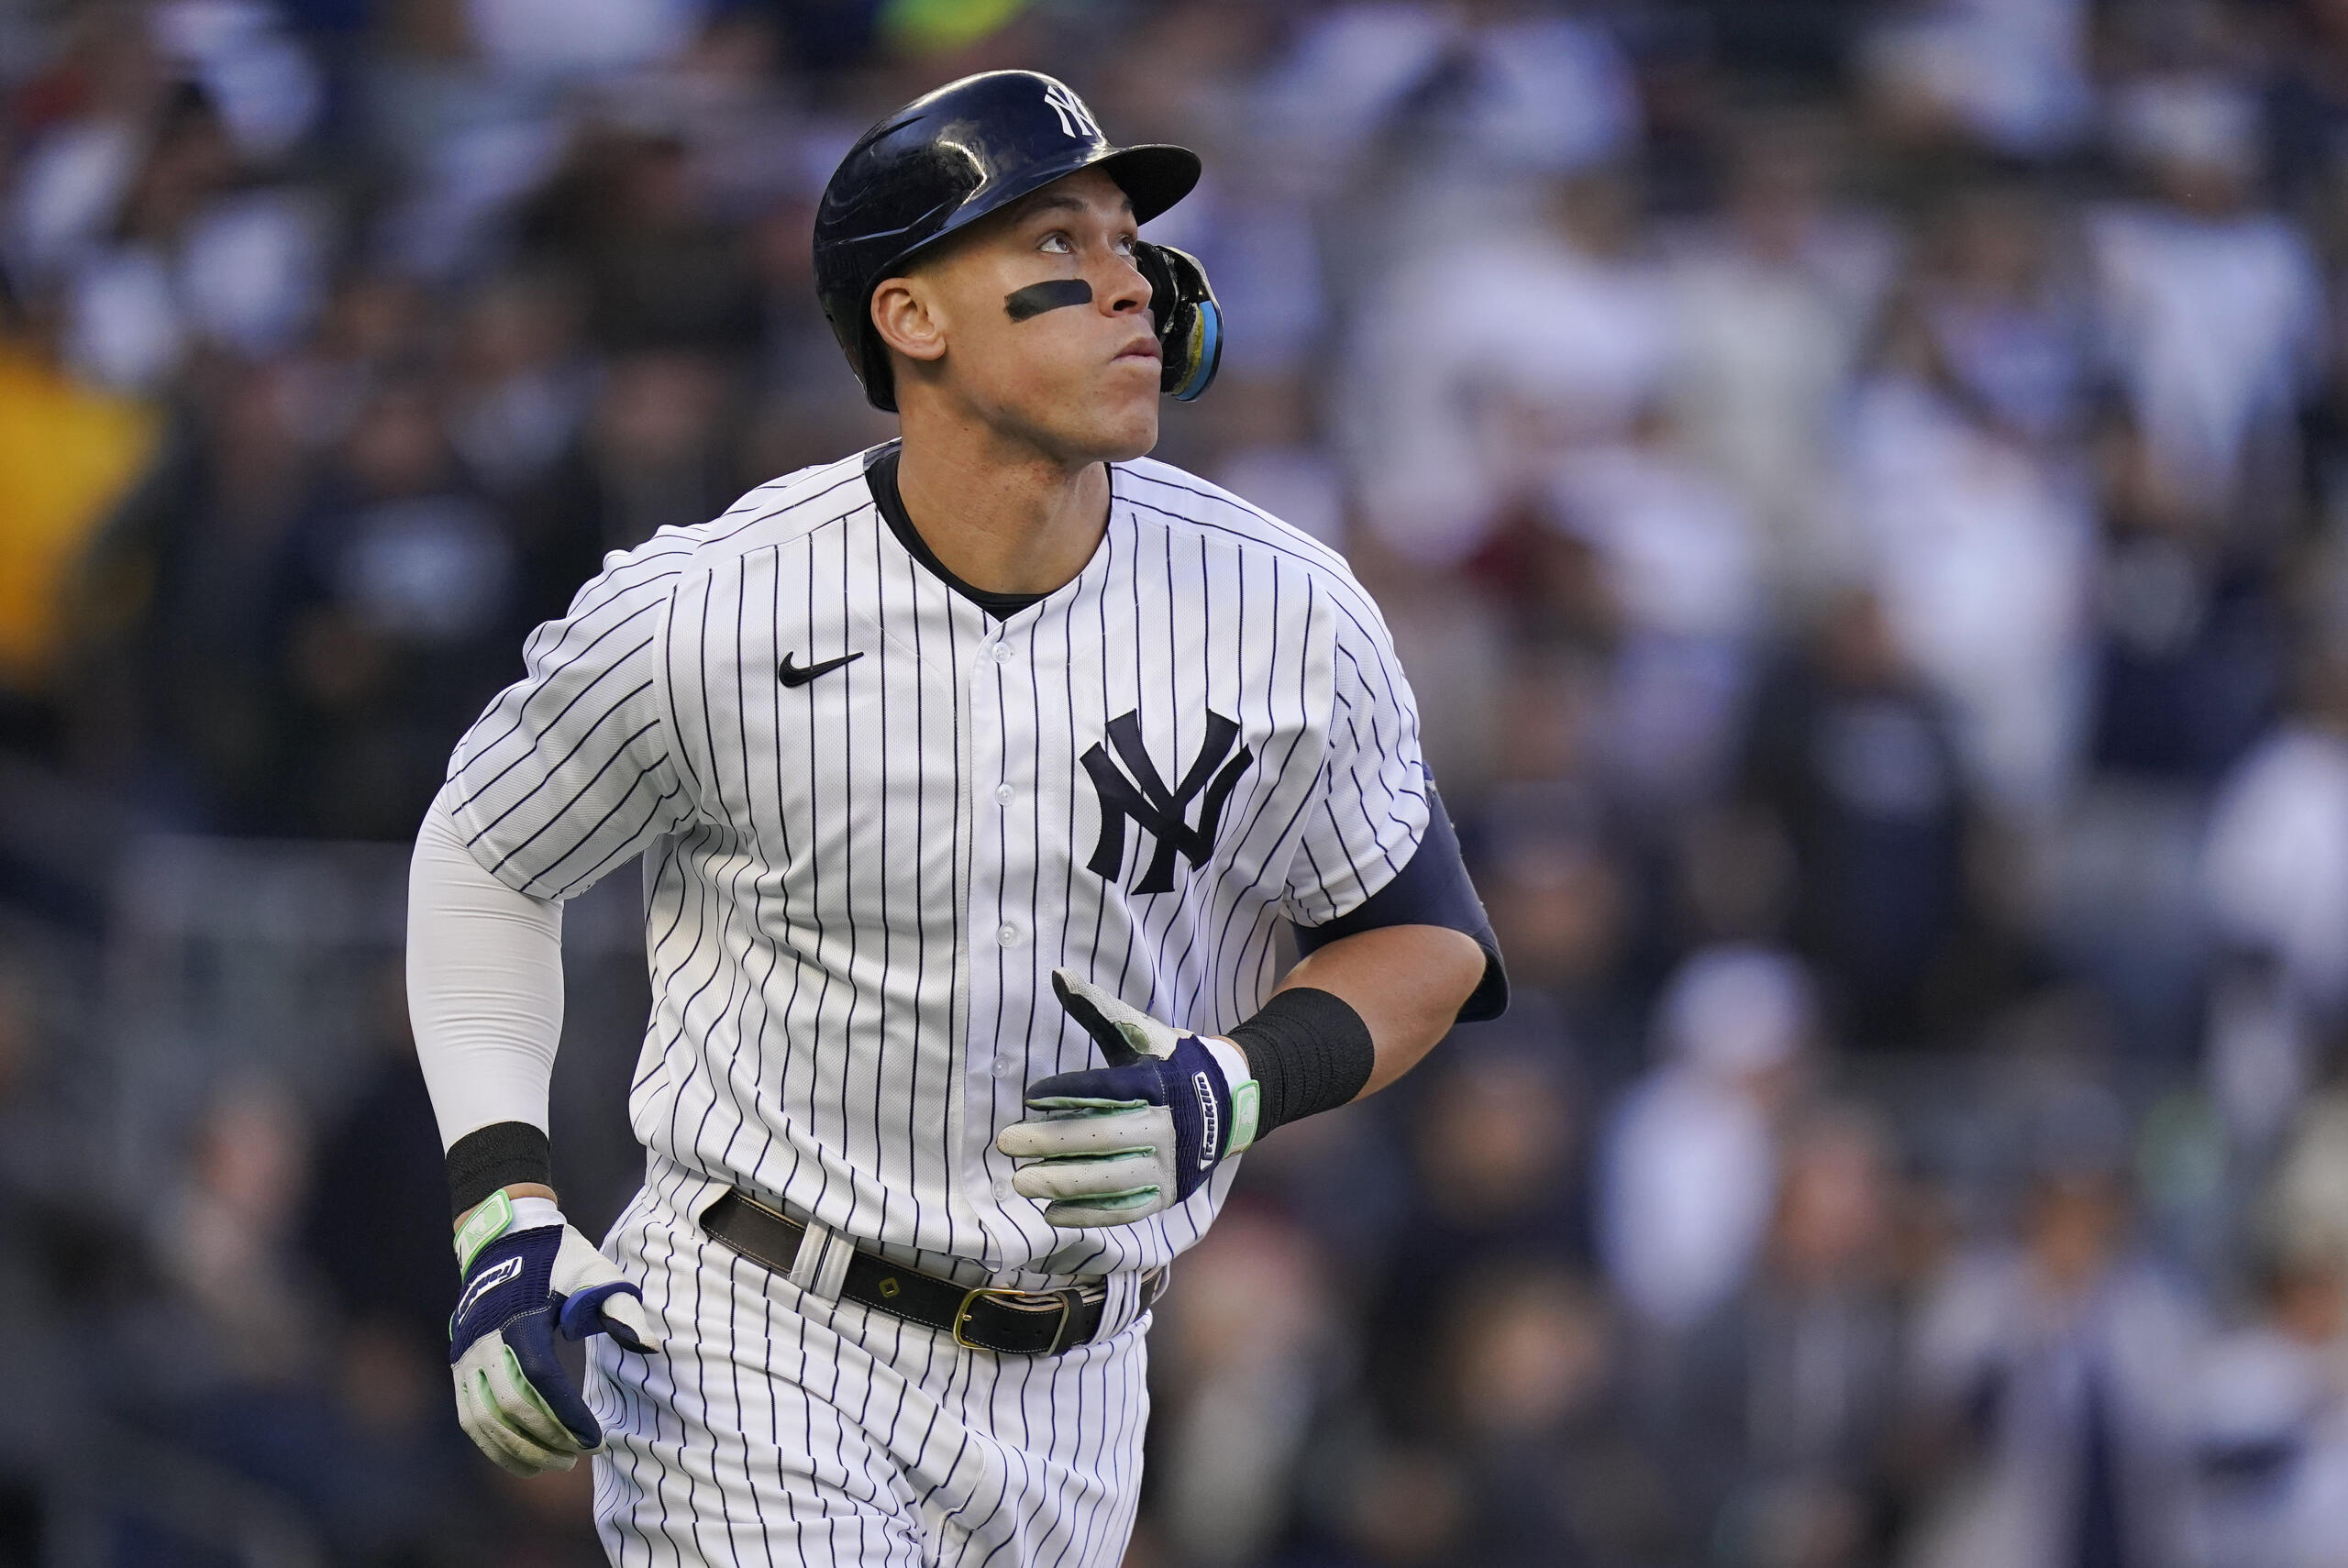 New York Yankees' Aaron Judge has agreed to return to the Yankees on a $360 million, nine-year contract, according to a person familiar with the deal. The person spoke to The Associated Press on Wednesday, Dec. 7, 2022 because the deal had not been announced.